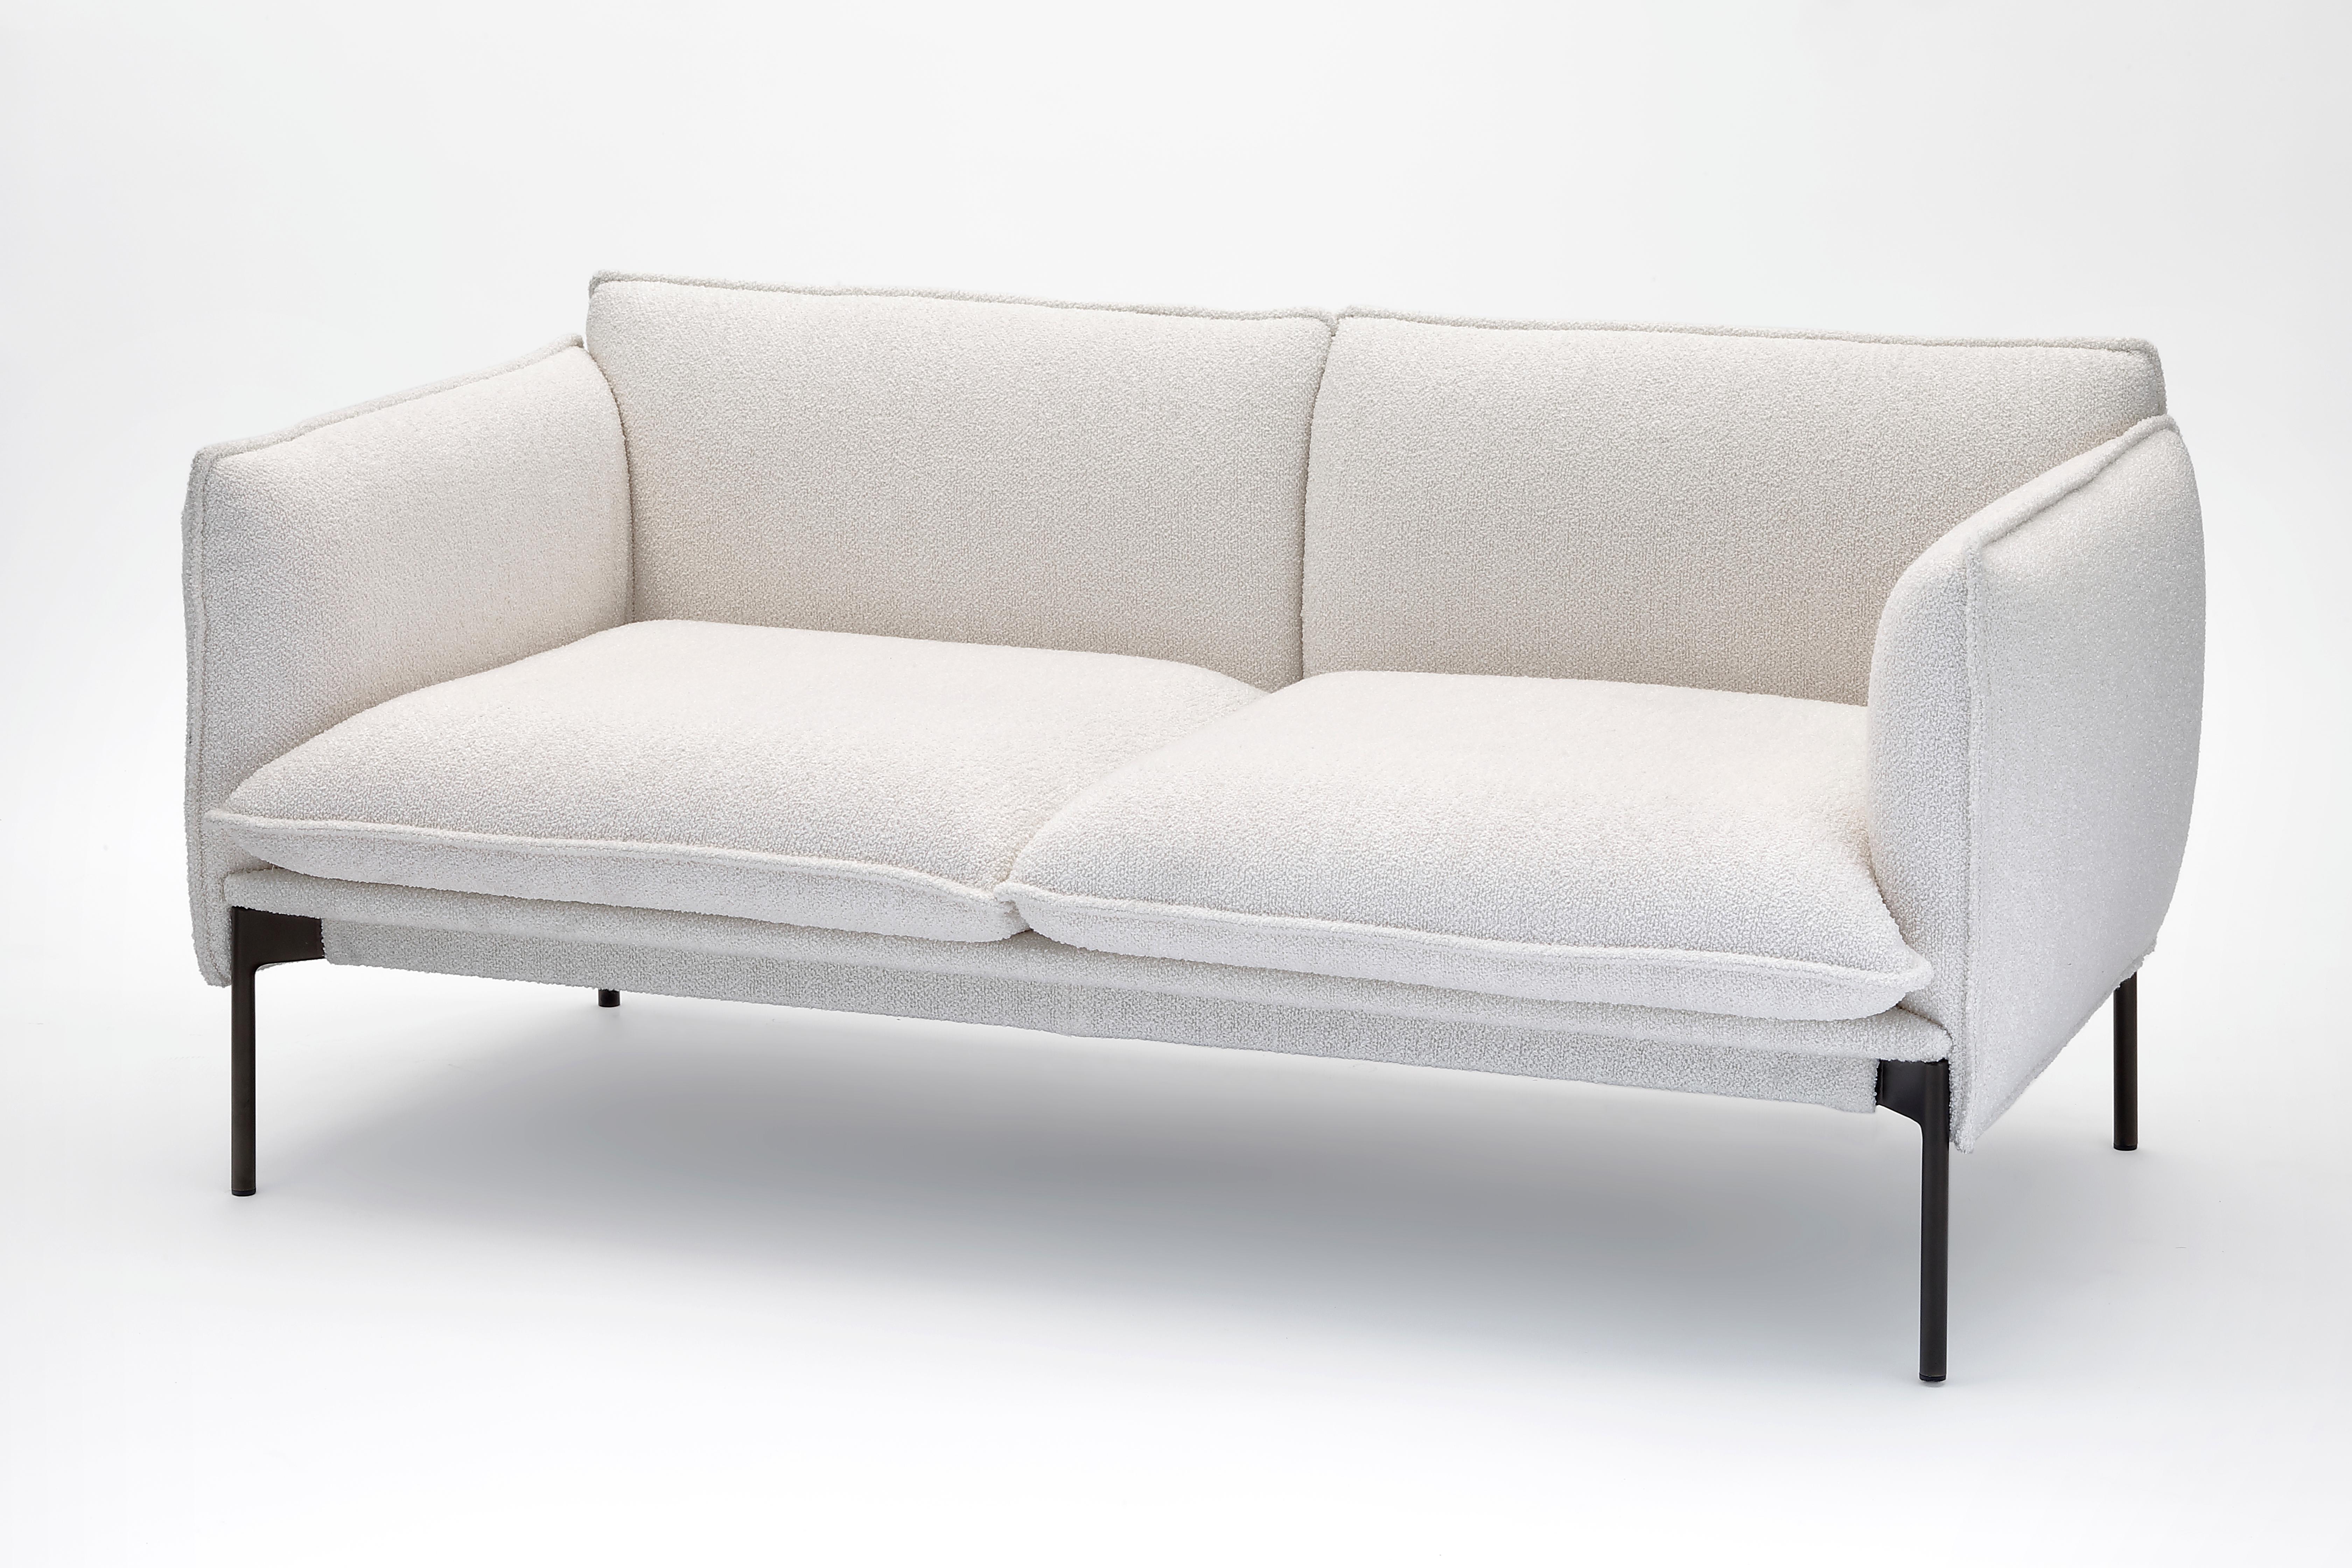 Palmspring sofa by Anderssen & Voll,
2020
Materials: Bronze lacquered metal structure, seat and back in polyurethane foam, upholstered
in fabric
Dimensions: 160 x 83 x 69 cm
 seat: 40 cm

3-seater sofa in polyurethane foam of different